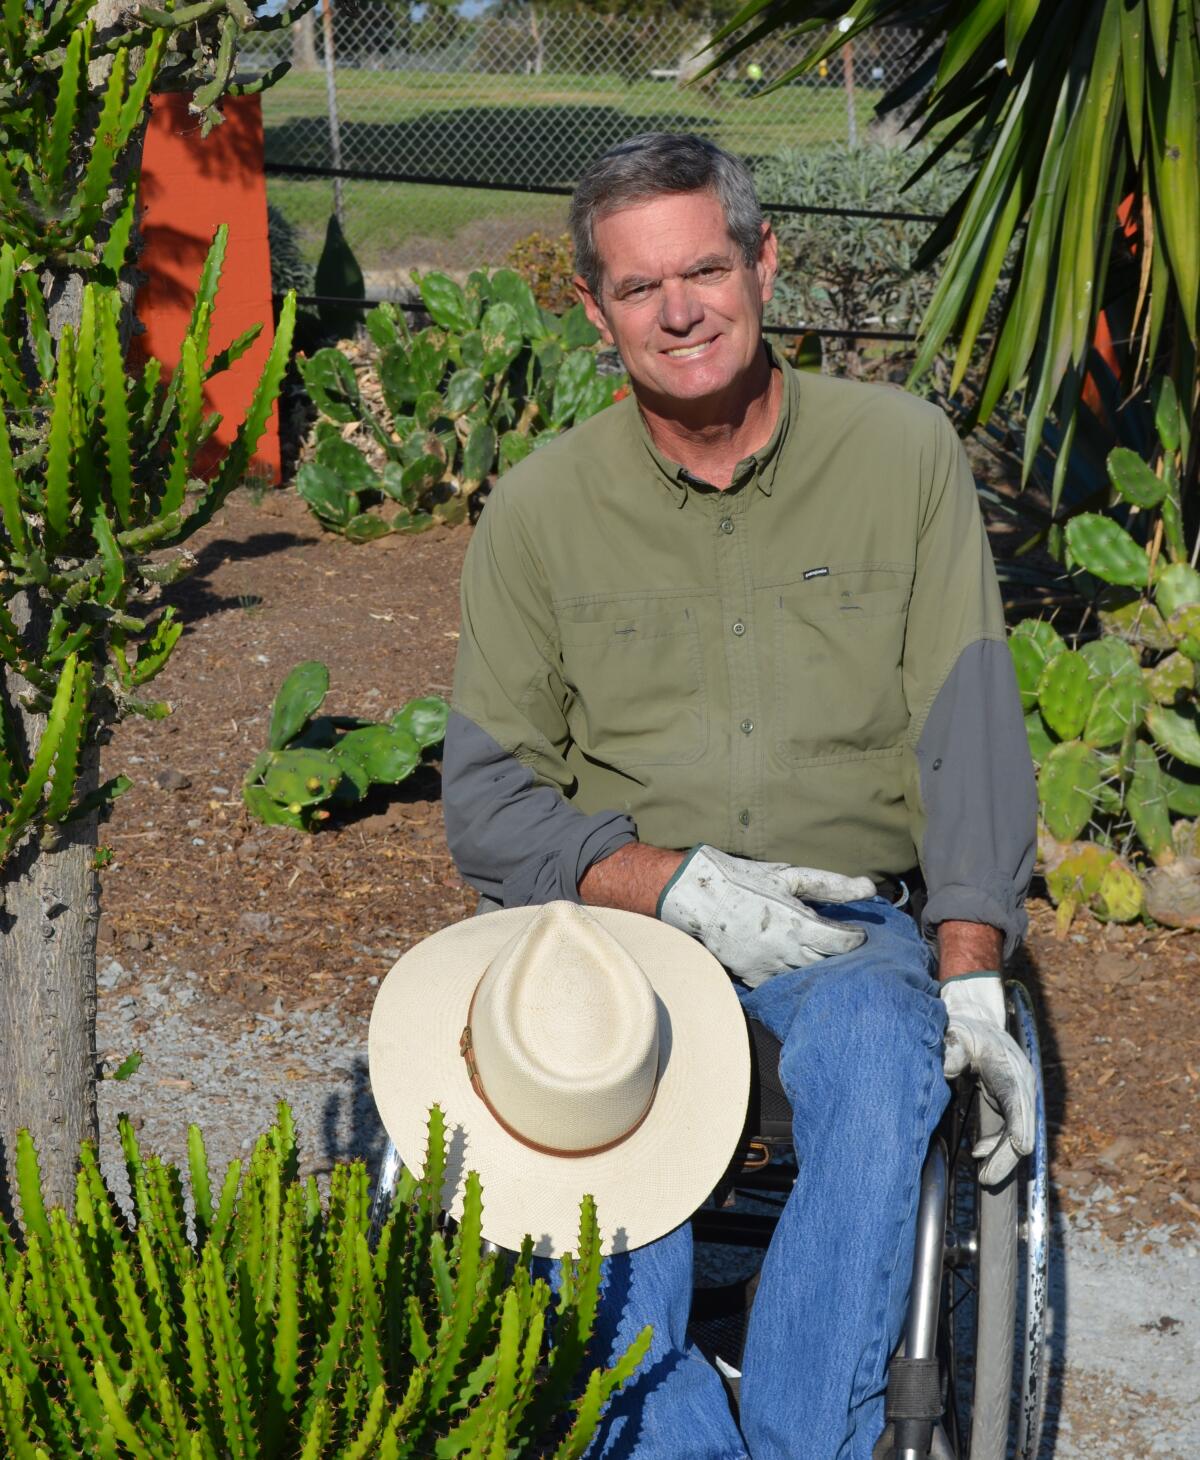 Stephen Cantu is a UCCE Master Gardener and two-time Paralympian whose new video covers Friendly Inclusive Gardening (FIG).